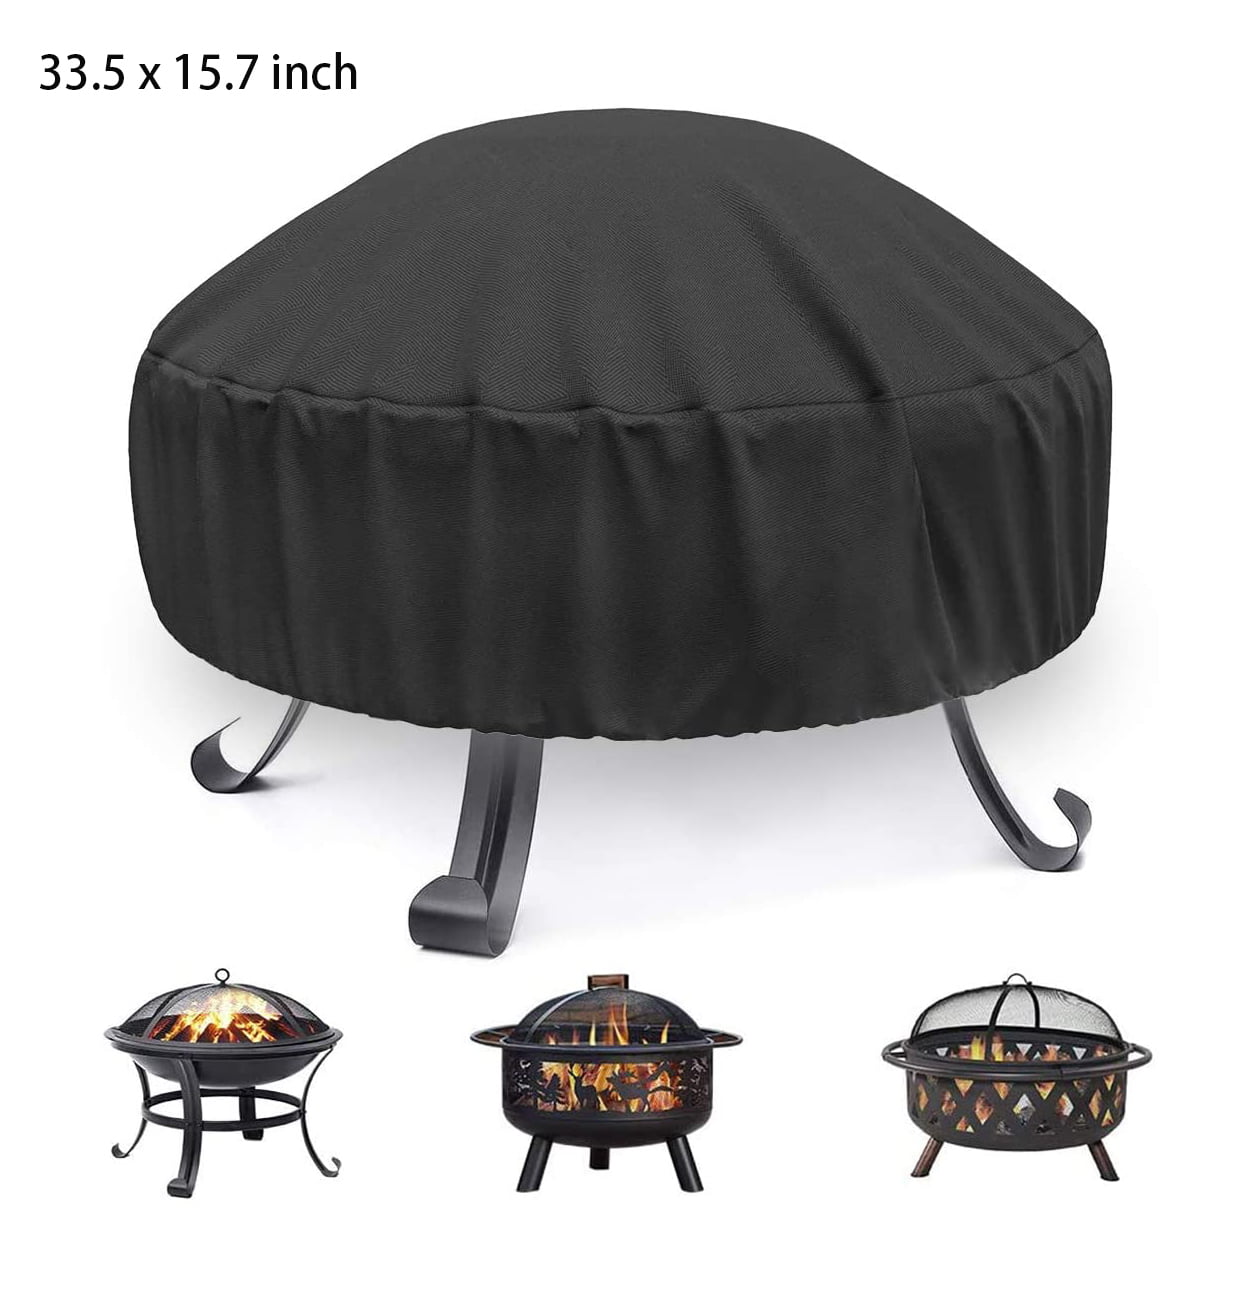 Waterproof Heavy Duty Patio Round Fire Pit Cover BBQ Grill UV Protector Tent 